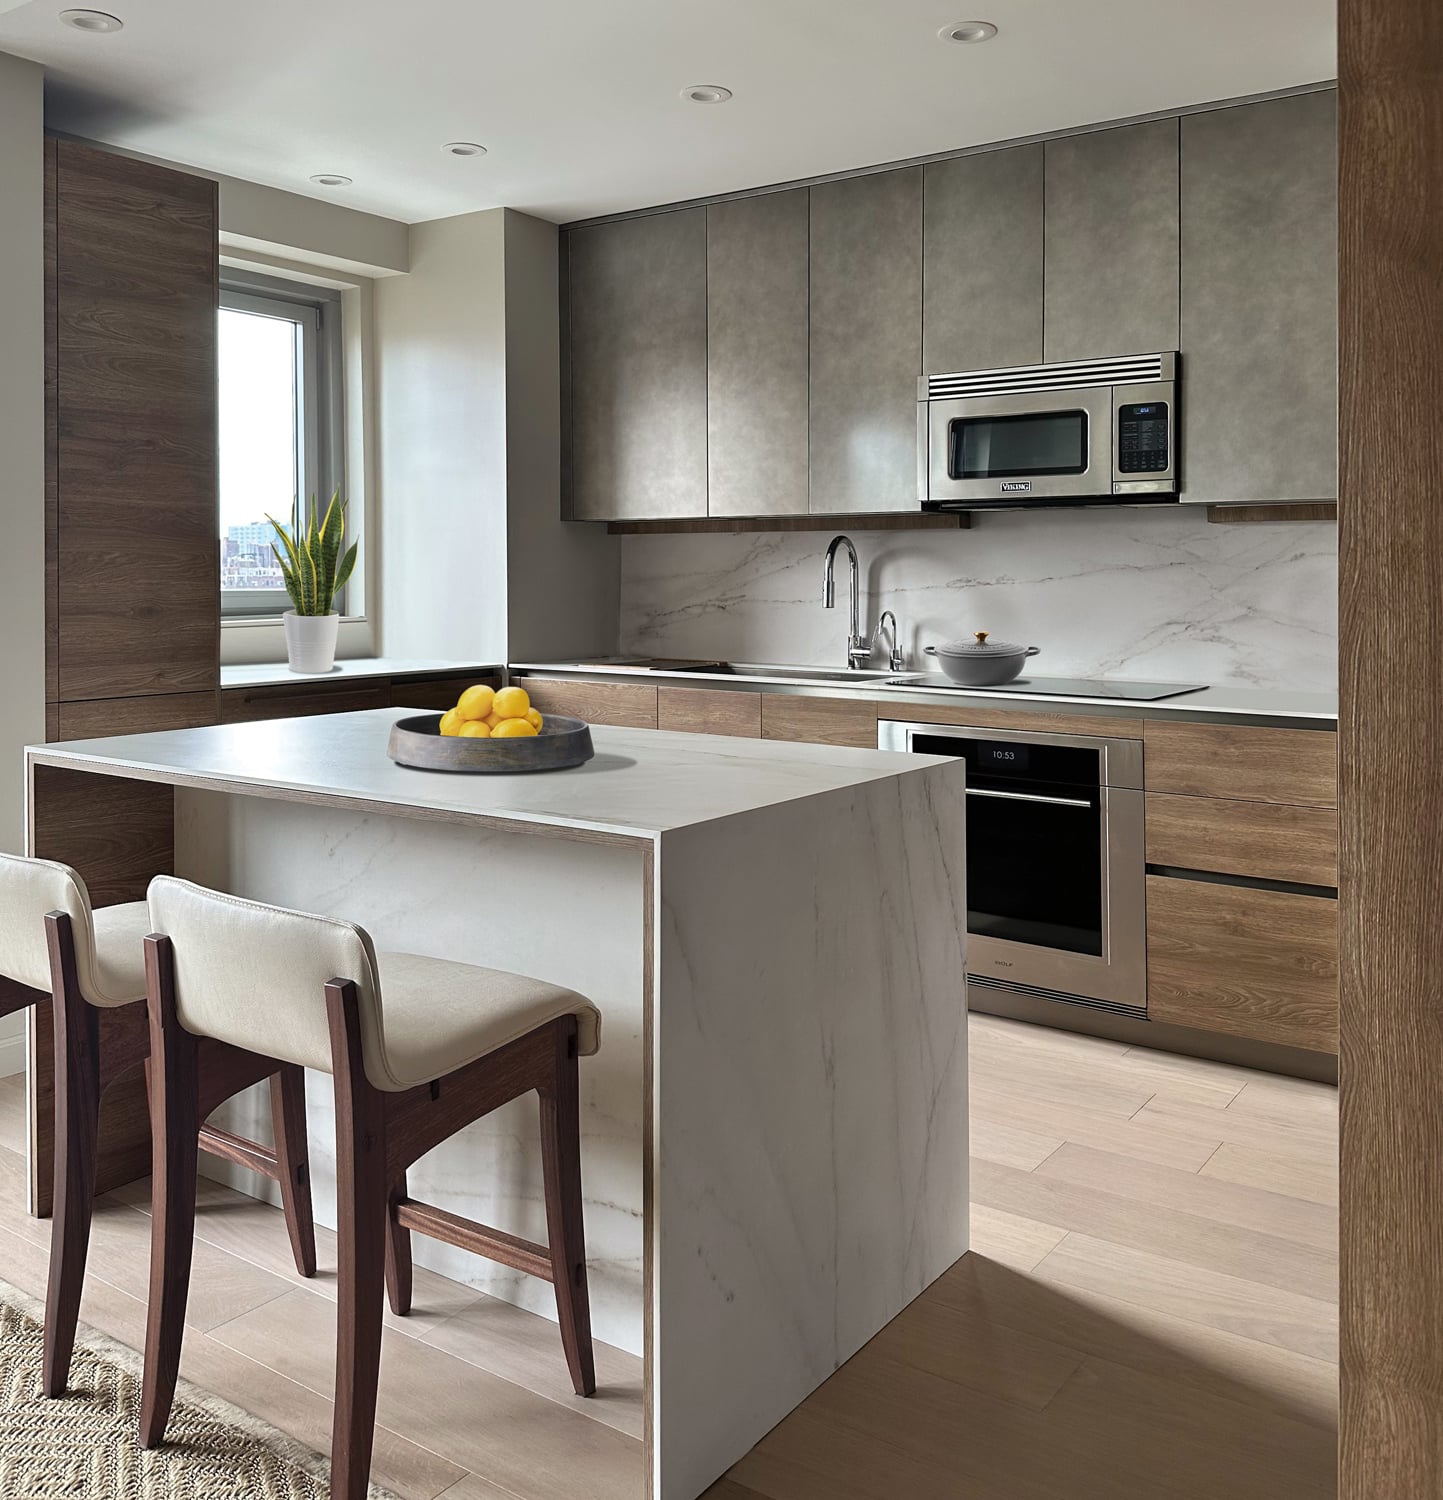 Upper East Side, New York, NY. YOTA and Rho cabinetry in Ghisa Urban lacquer and wood melamine. Countertop & Backsplash in Dekton Rem. Designed by Lorena Polon, Senior Design Consultant of MandiCasa New York, in collaboration with Matthew Yee Interiors.